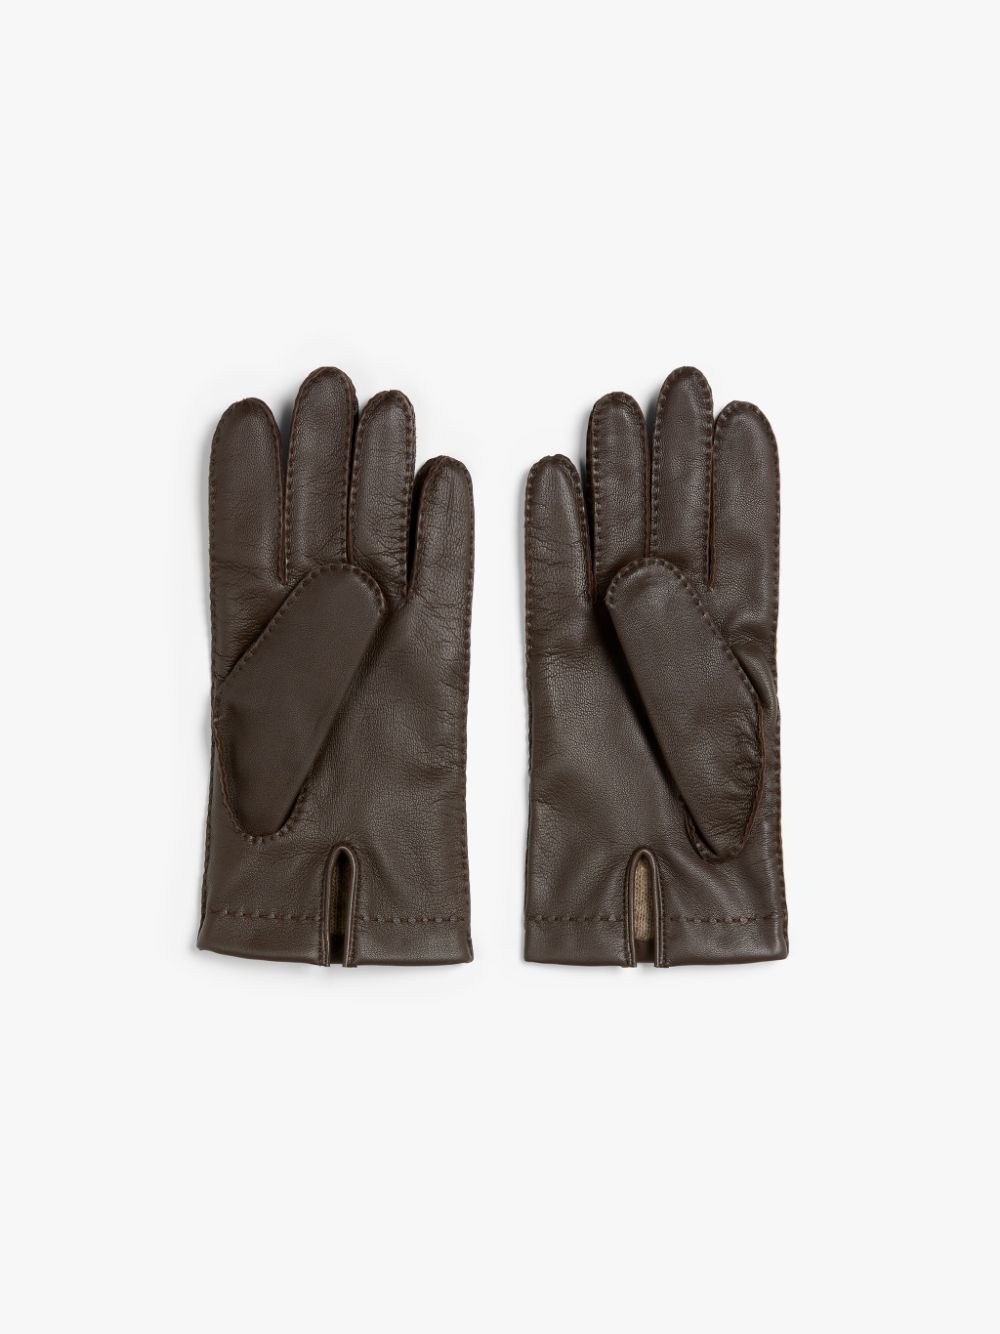 BROWN HAIRSHEEP LEATHER CASHMERE LINED GLOVES - 3